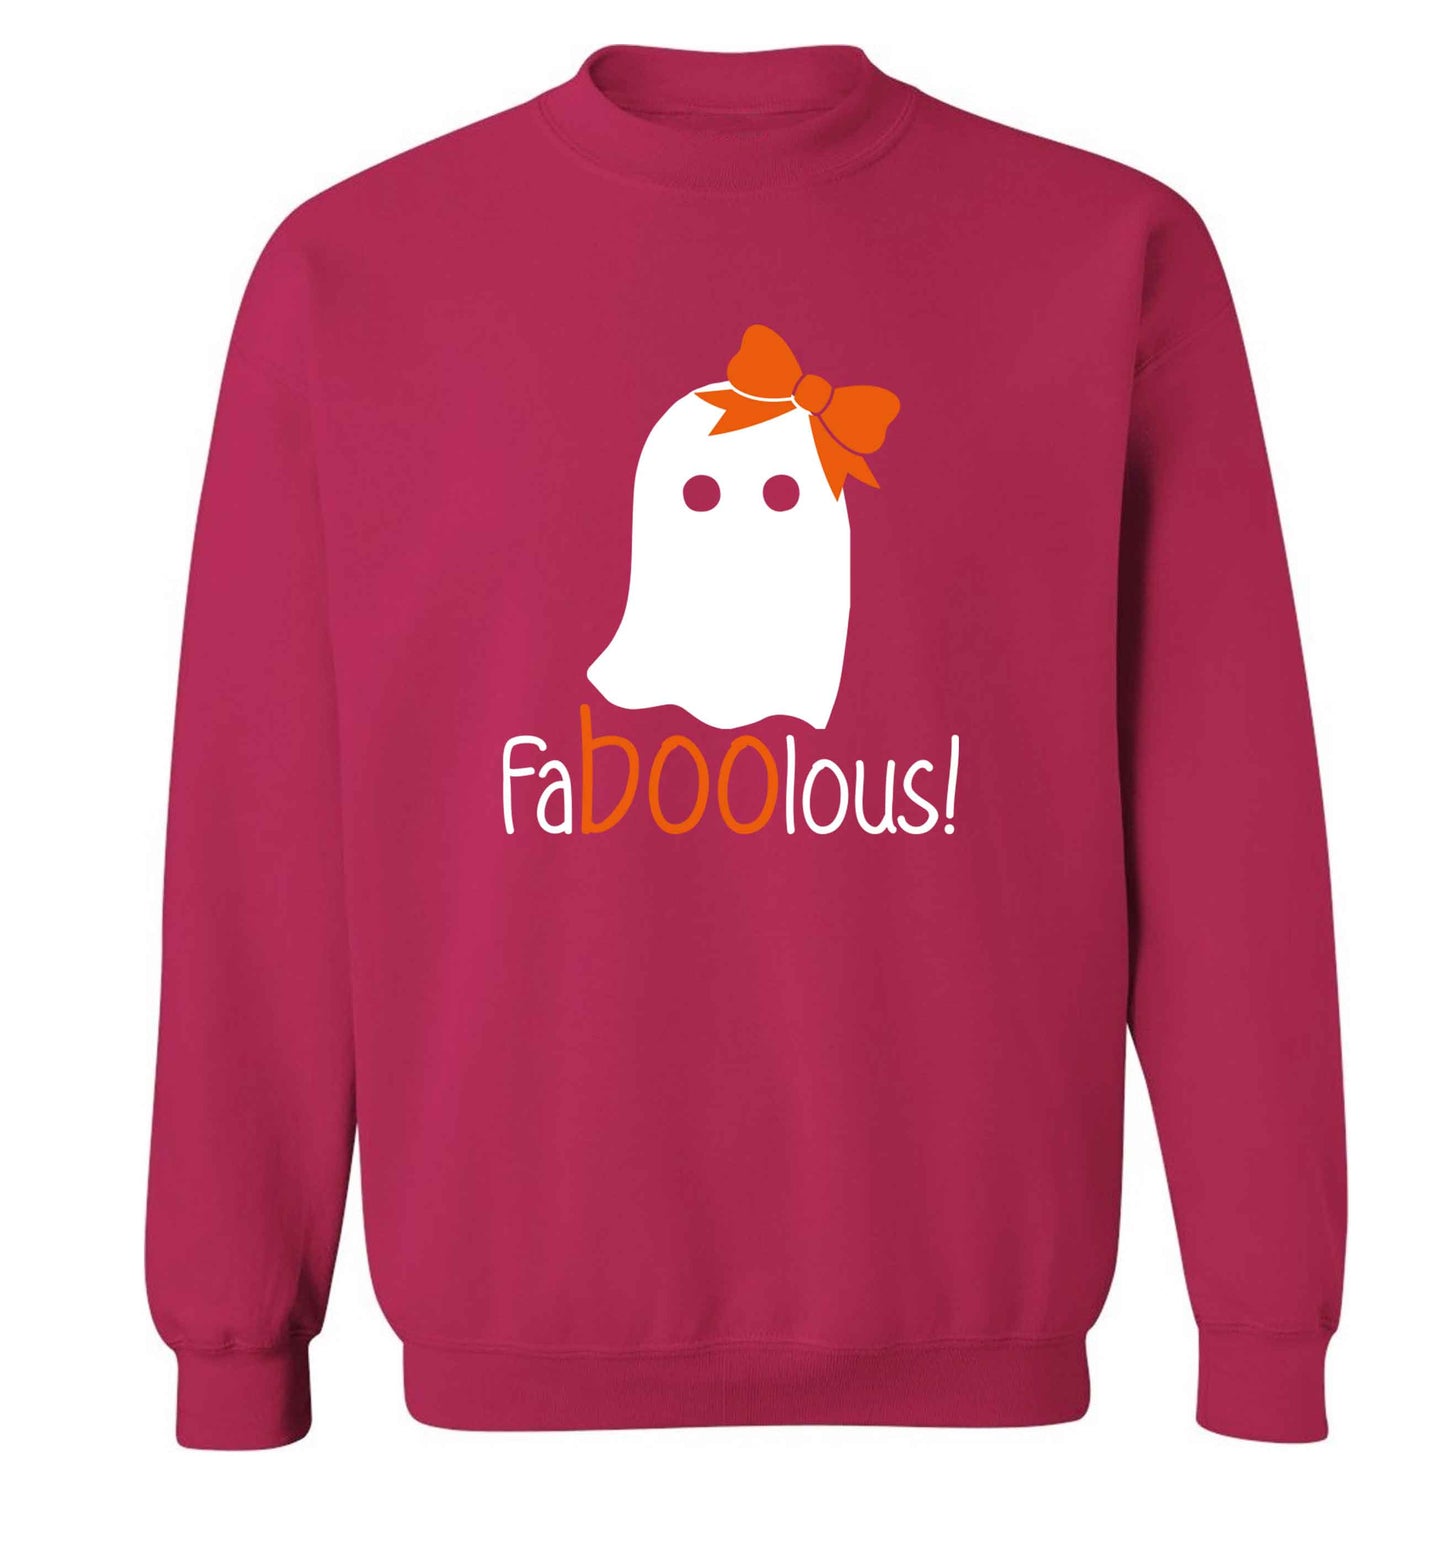 Faboolous ghost adult's unisex pink sweater 2XL